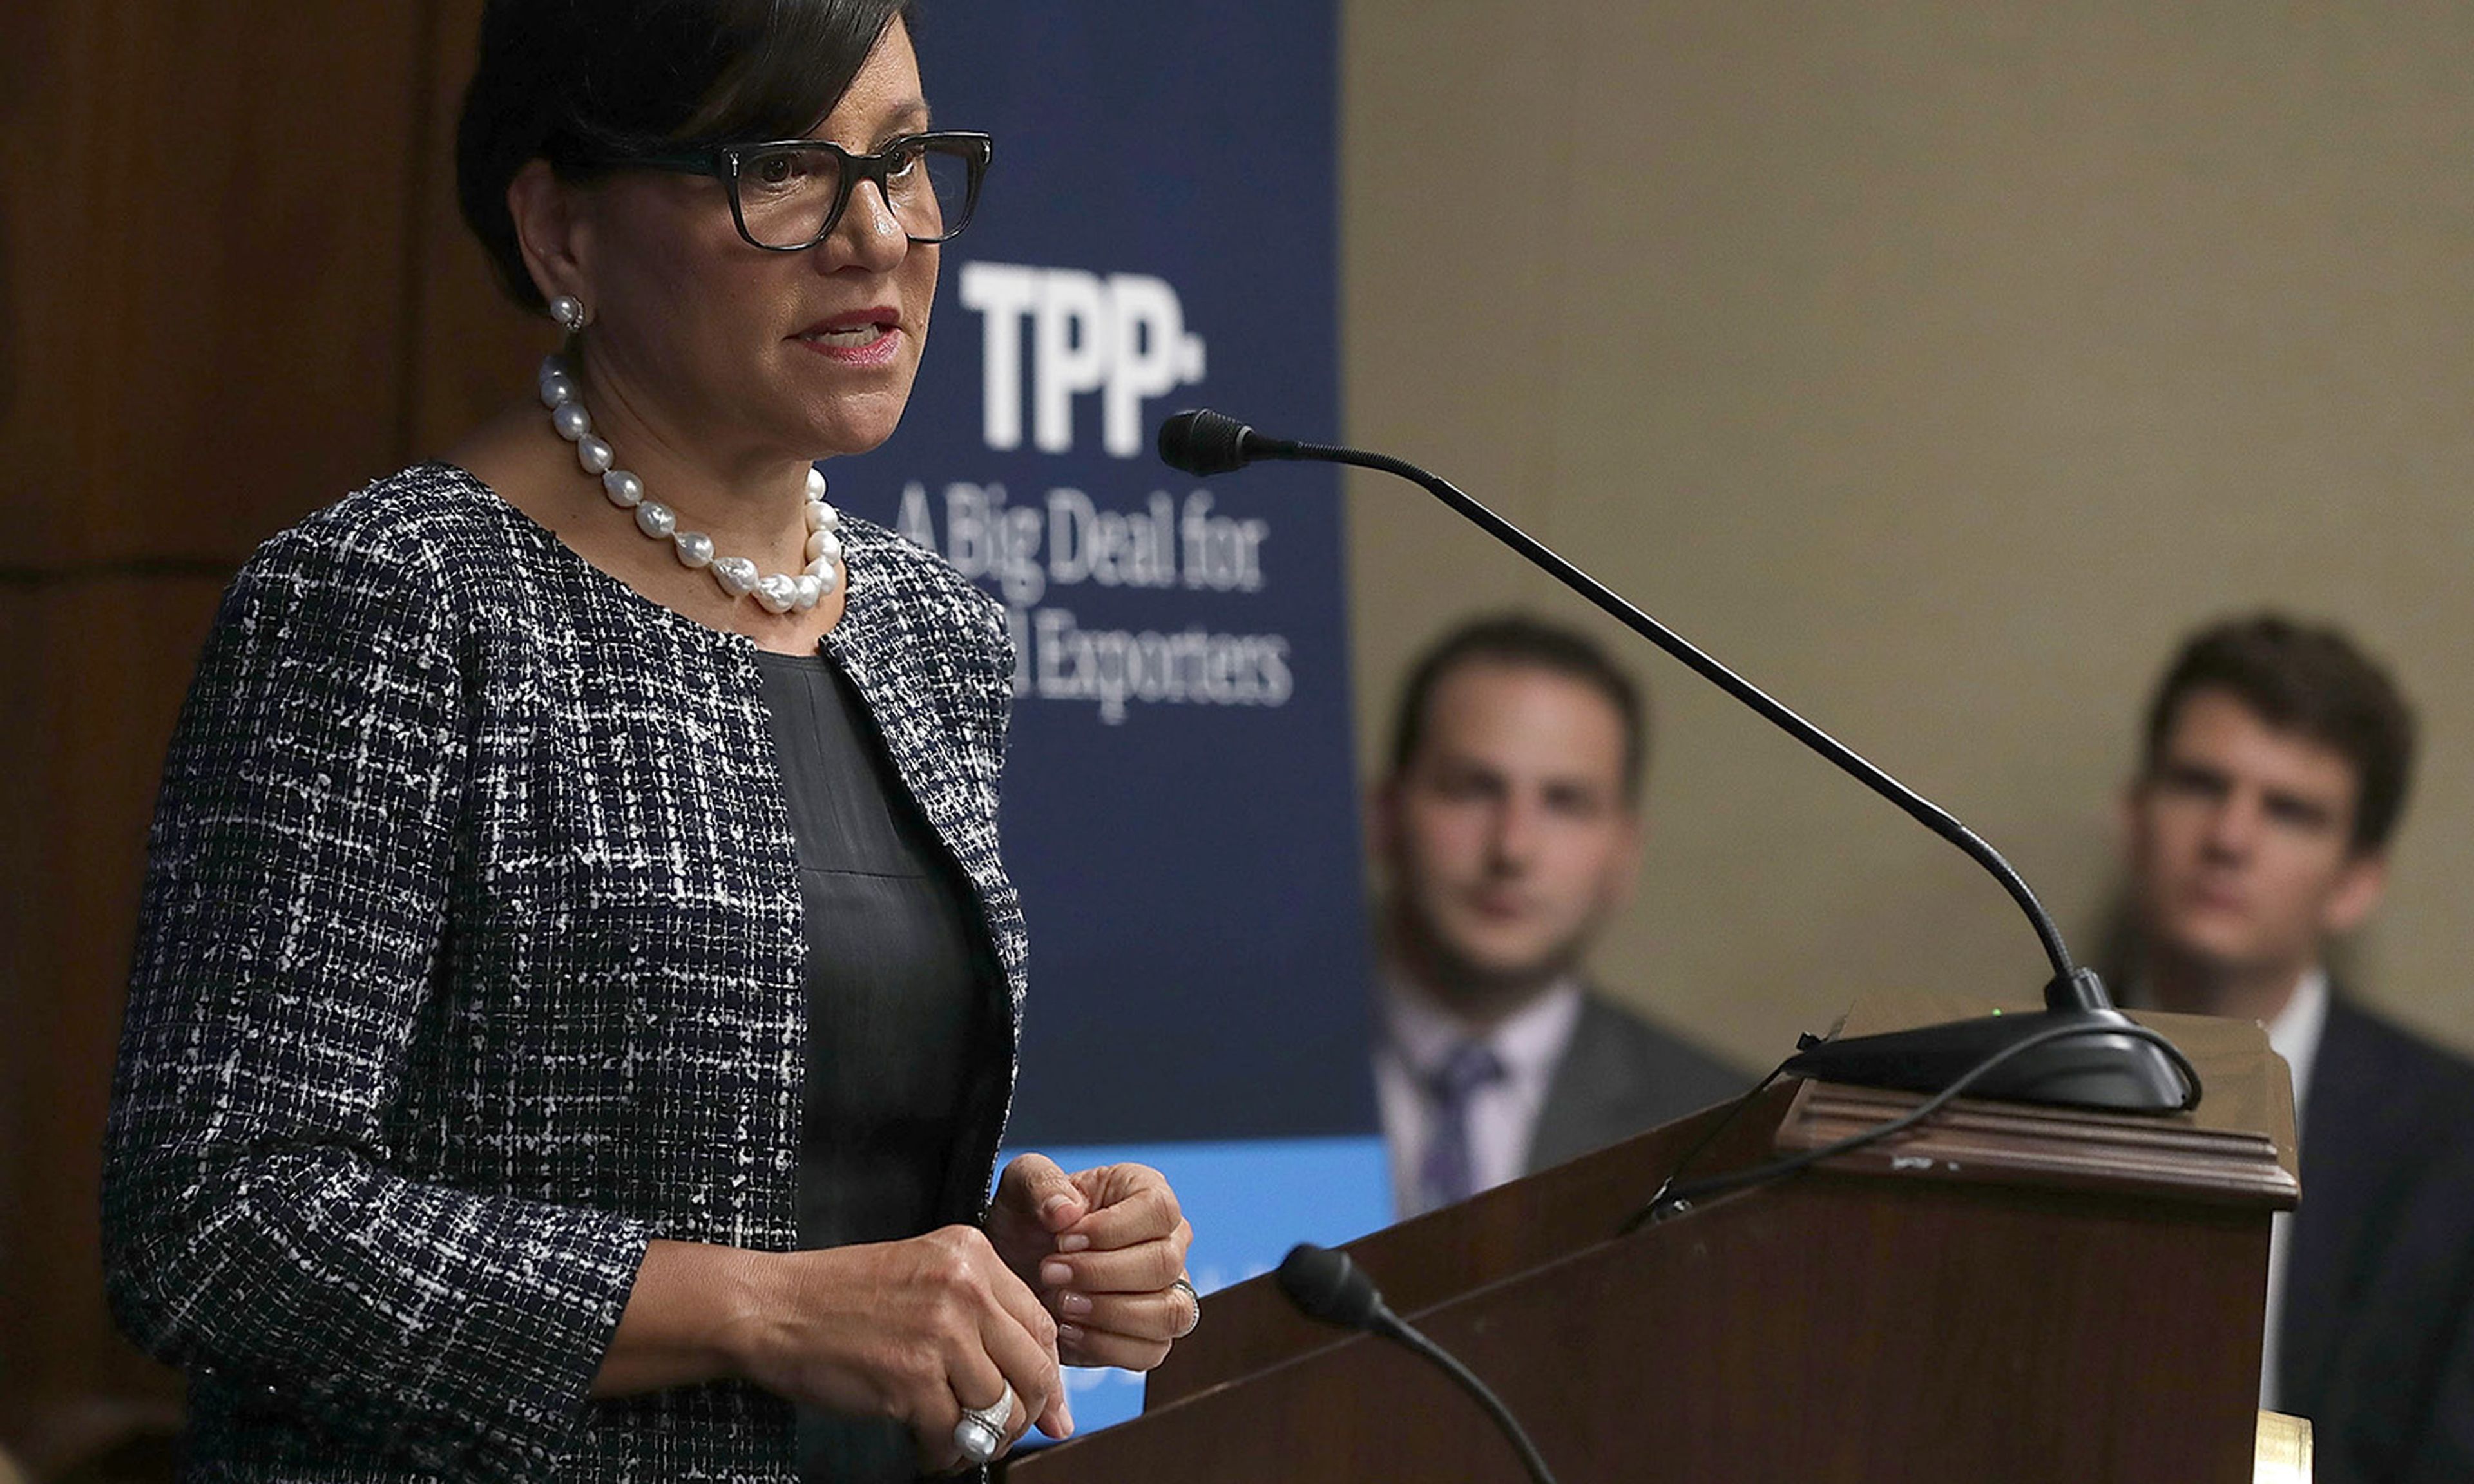 Then-Secretary of Commerce Penny Pritzker speaks during a discussion on the Trans-Pacific Partnership (TPP) on Sept. 26, 2016, in Washington. (Photo by Alex Wong/Getty Images)